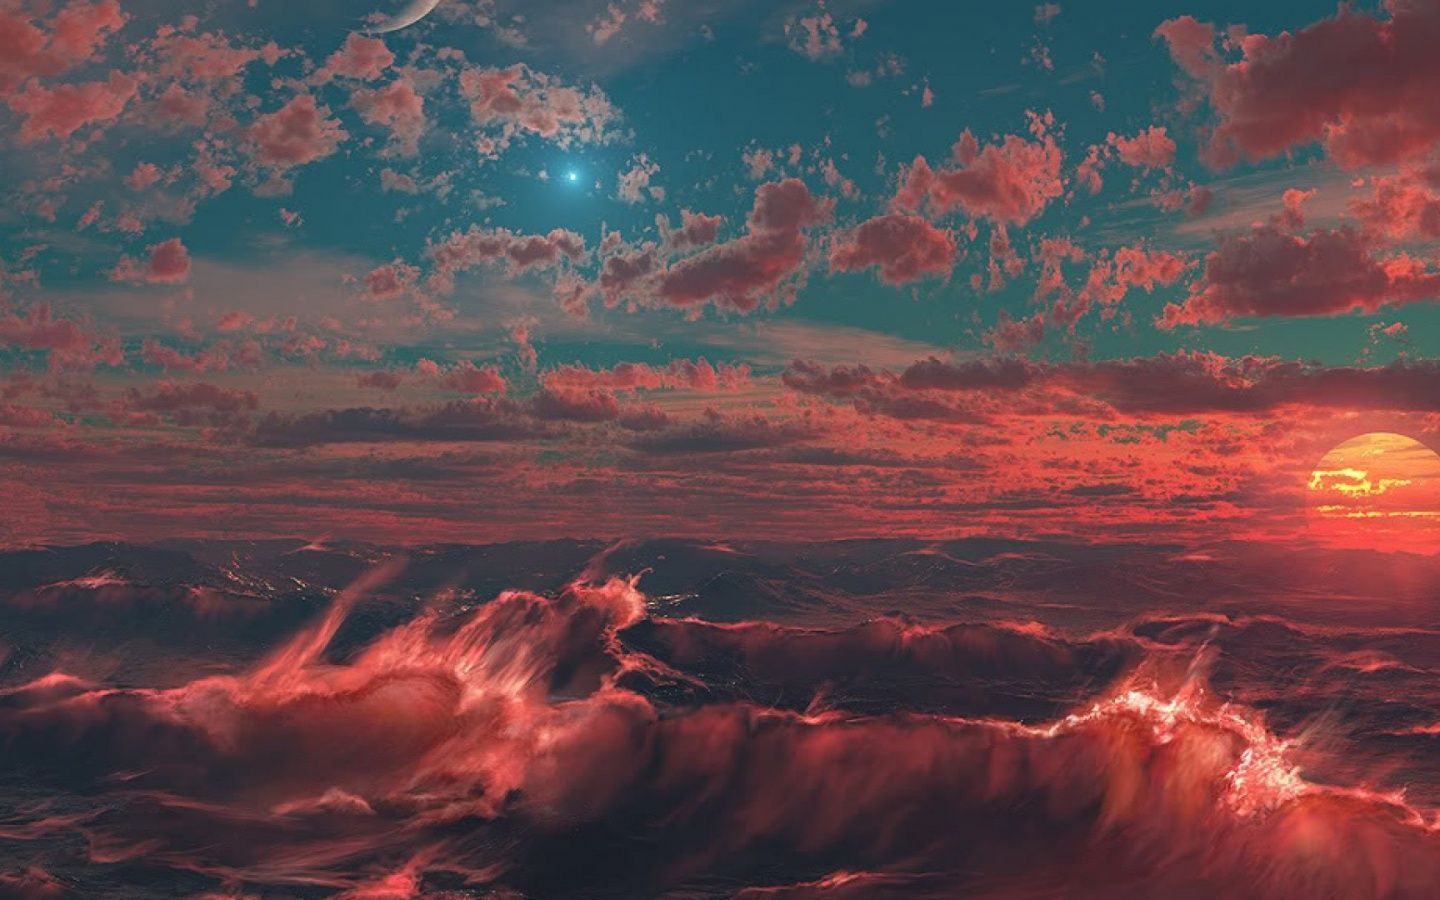 A red sunset over a body of water - 1440x900